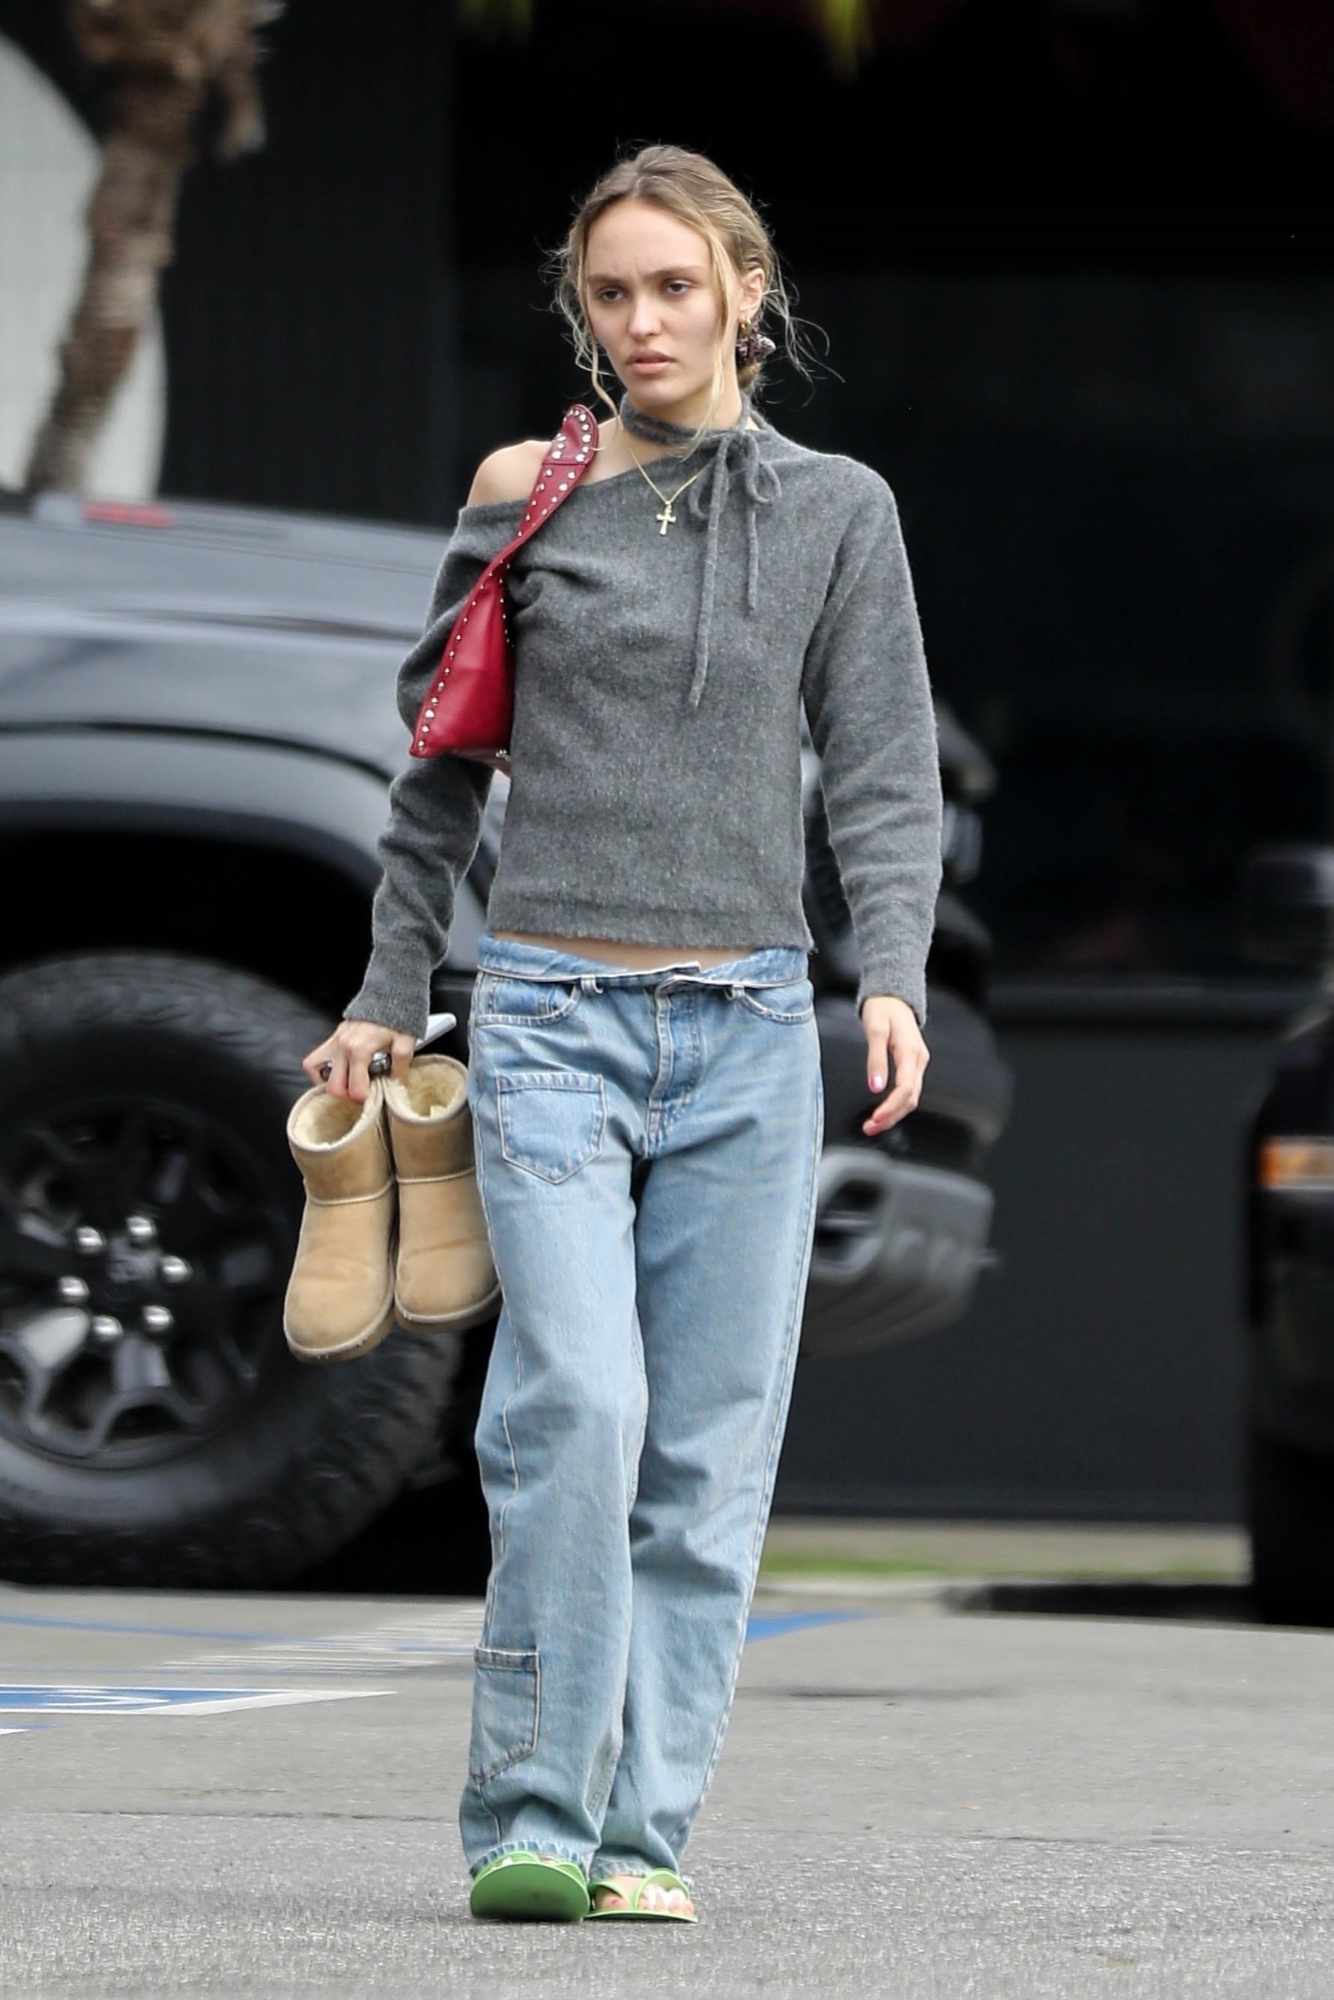 Lily-Rose Depp wears a cross necklace, grey knit top, red handbag, baggy jeans & UGG boots with yellow flip-flops on October 2 in Los Angeles